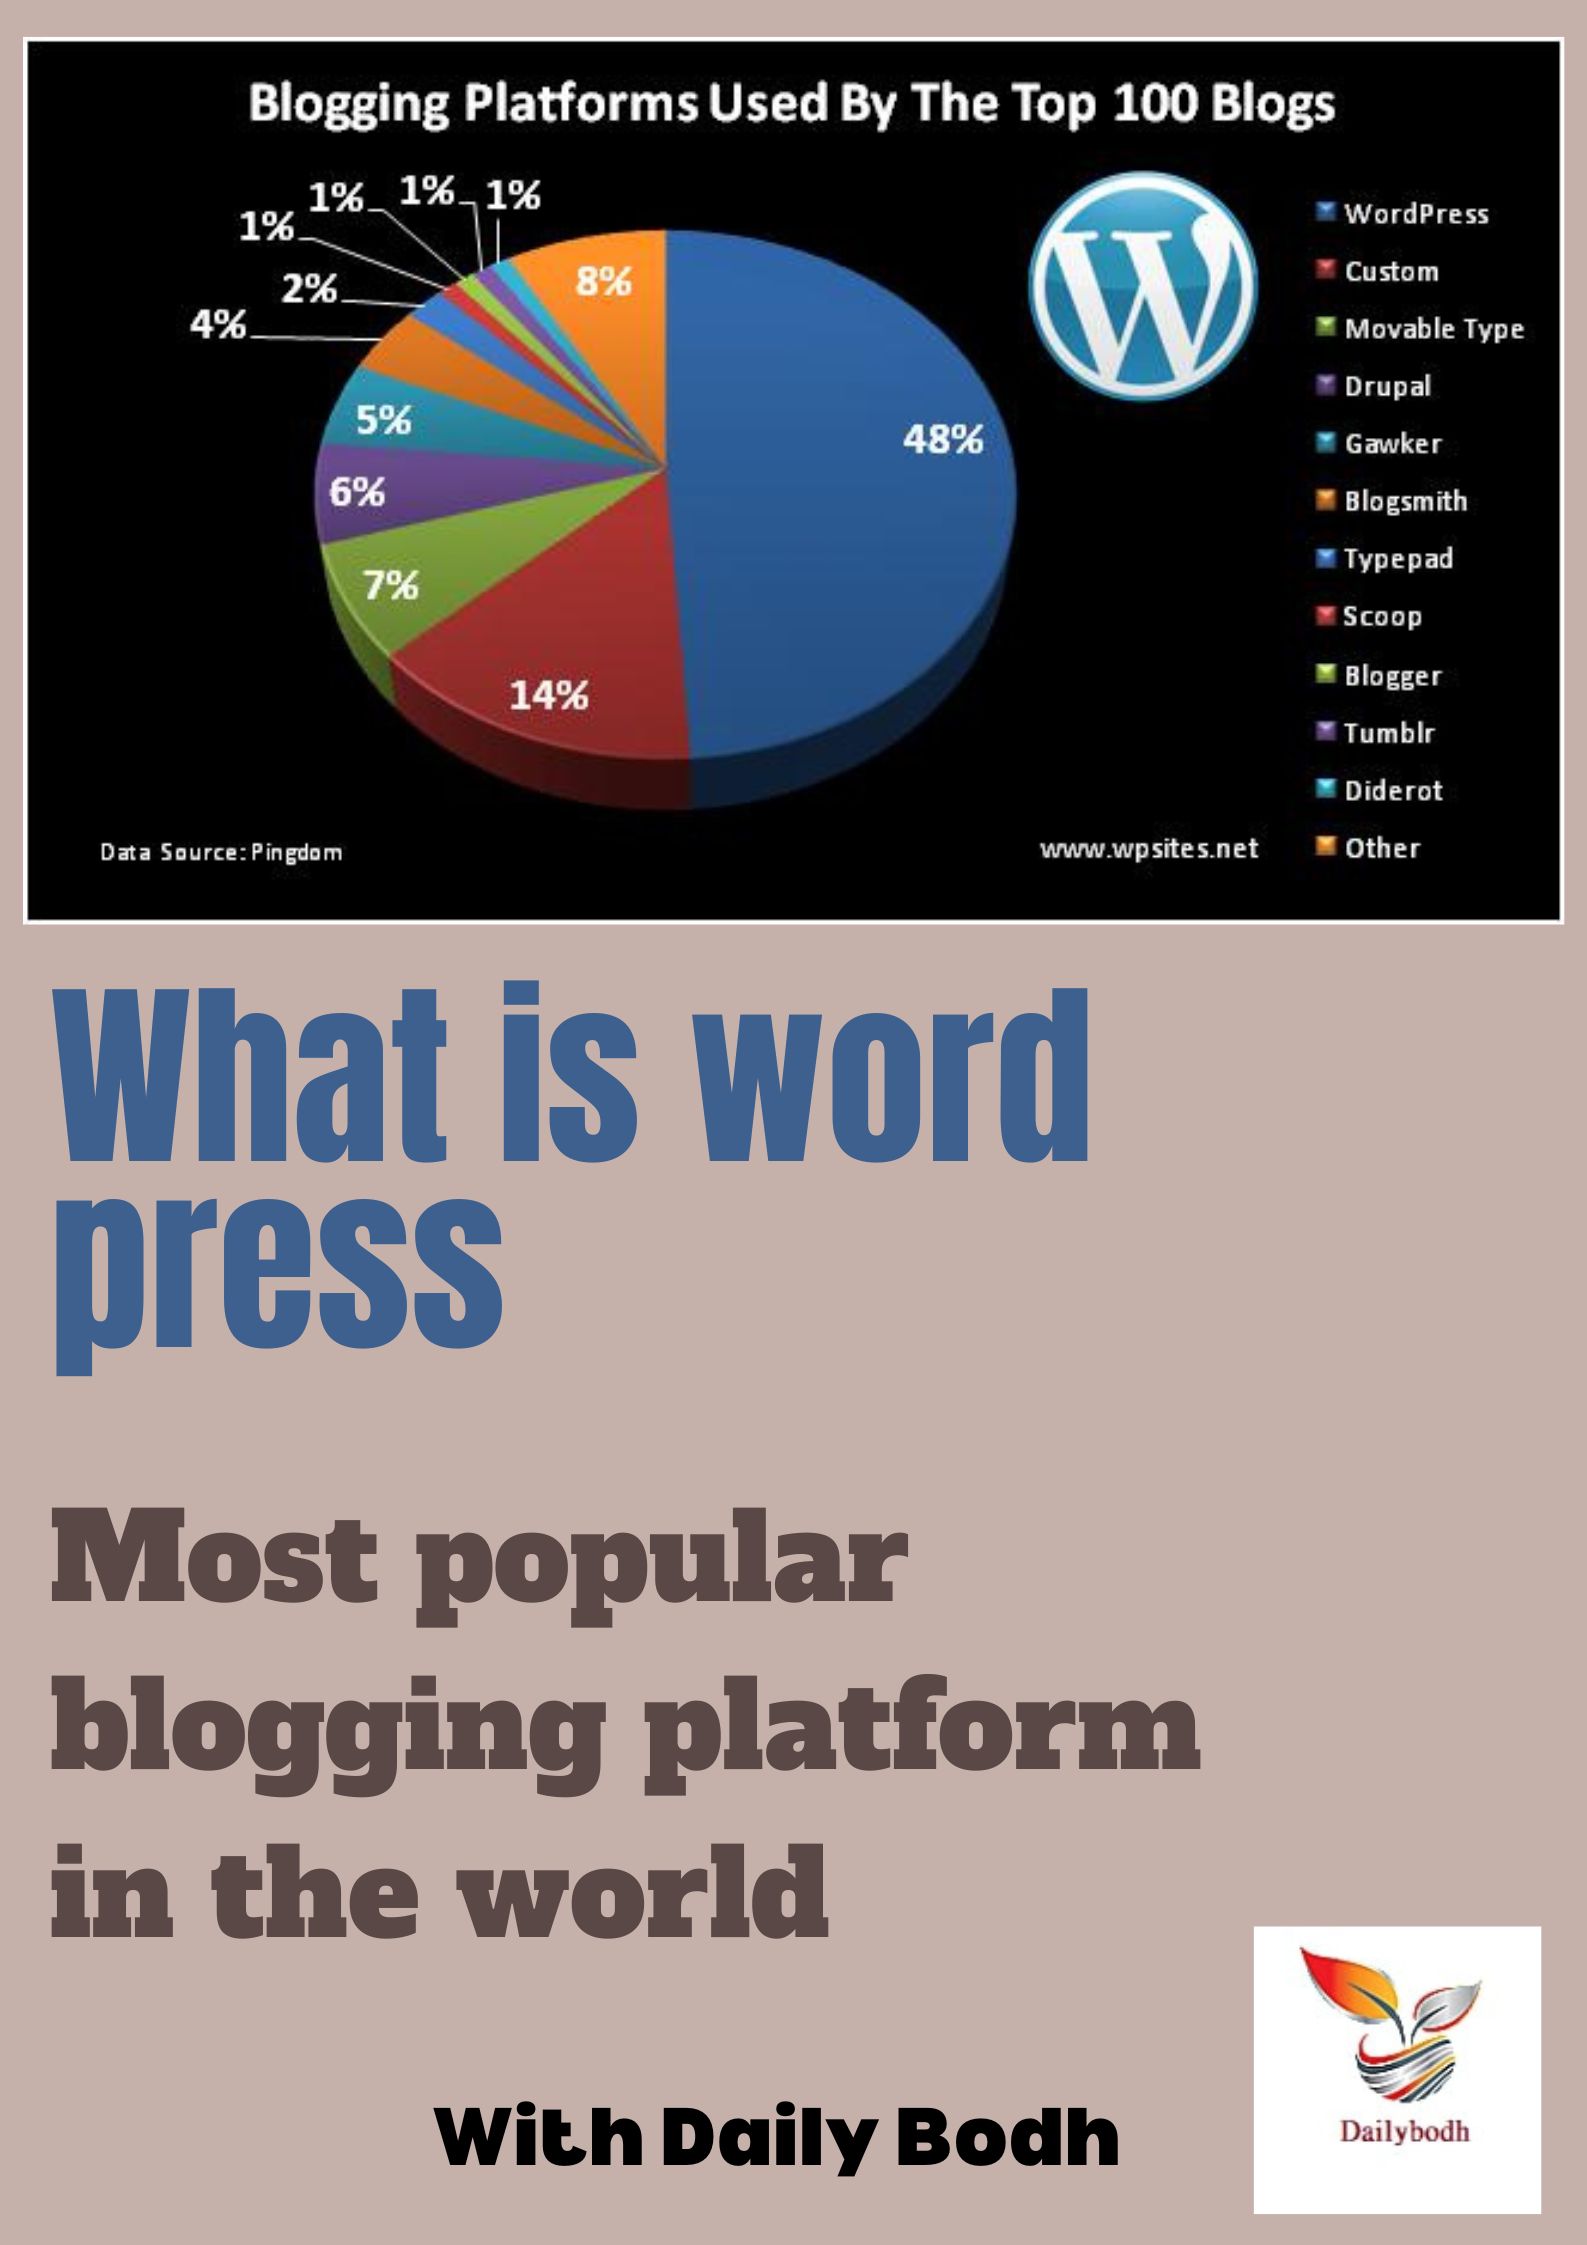 What is word press